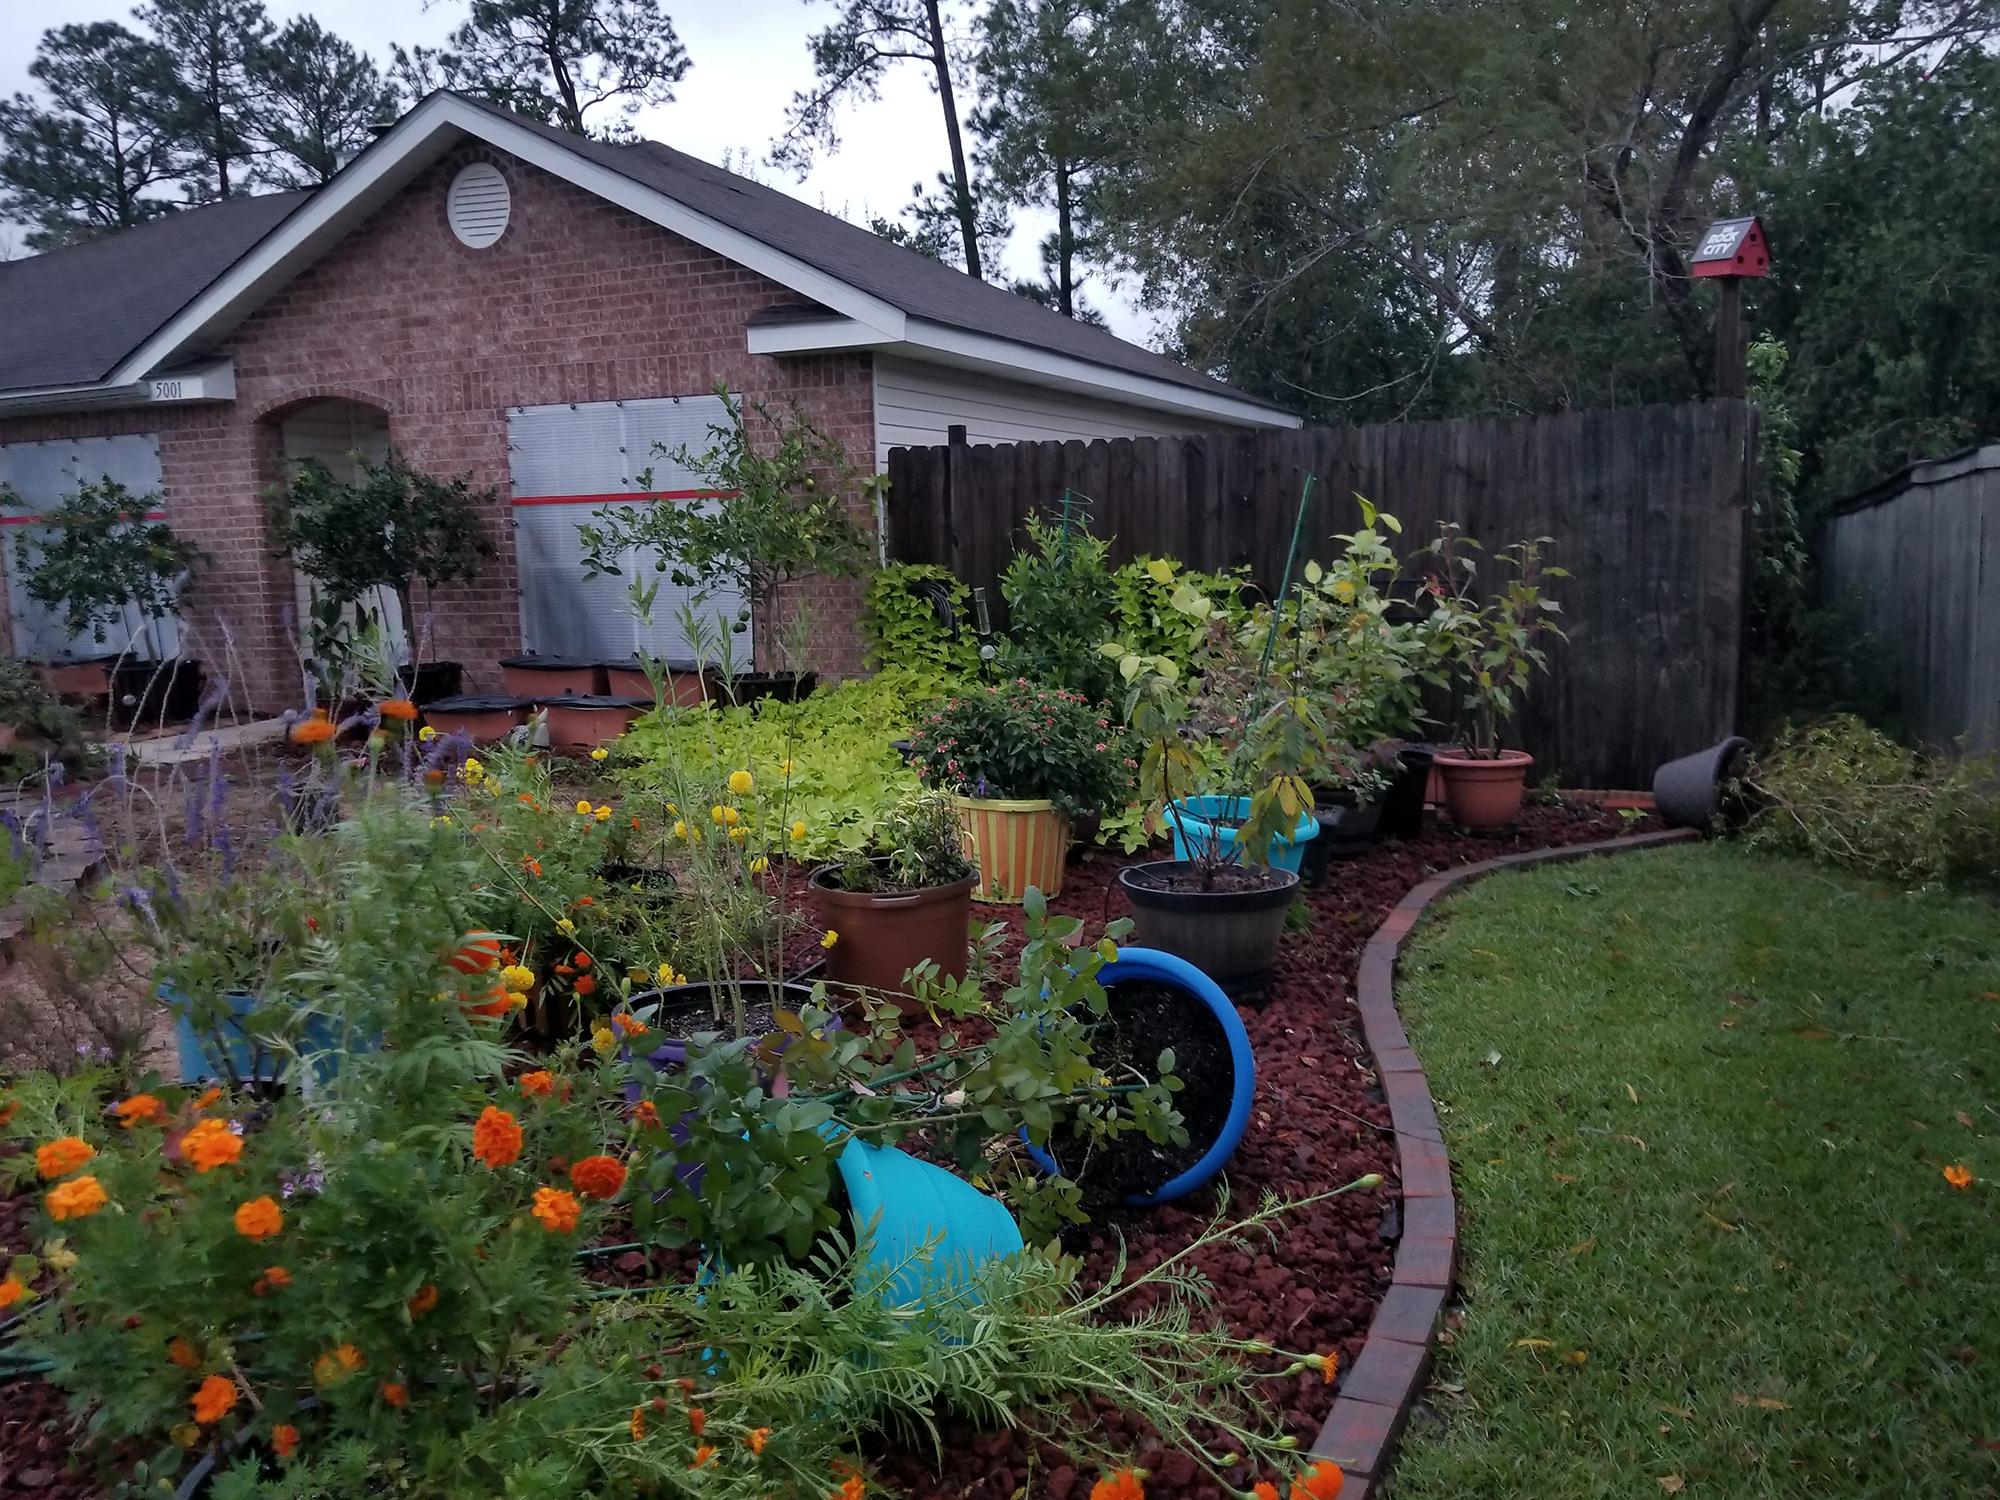  Several blue containers in this colorful landscape garden are blown over after heavy storm winds.